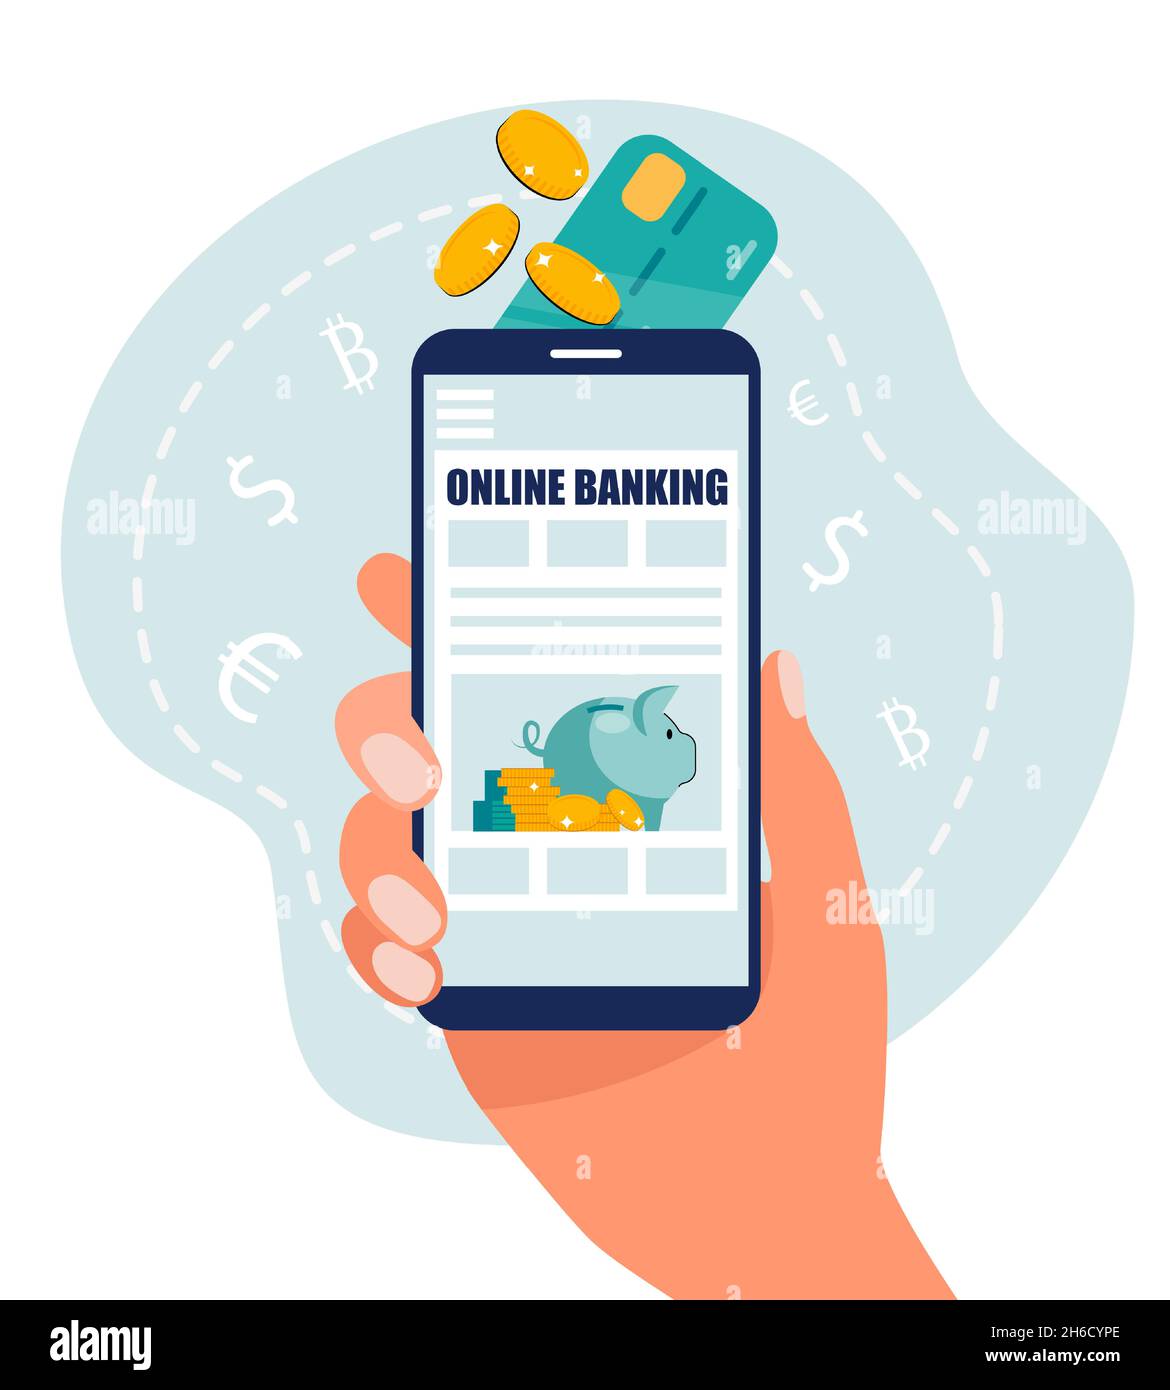 Hand holding mobile phone with online banking interface, digital financial service. The concept of maintaining and increasing financial resources. Stock Vector